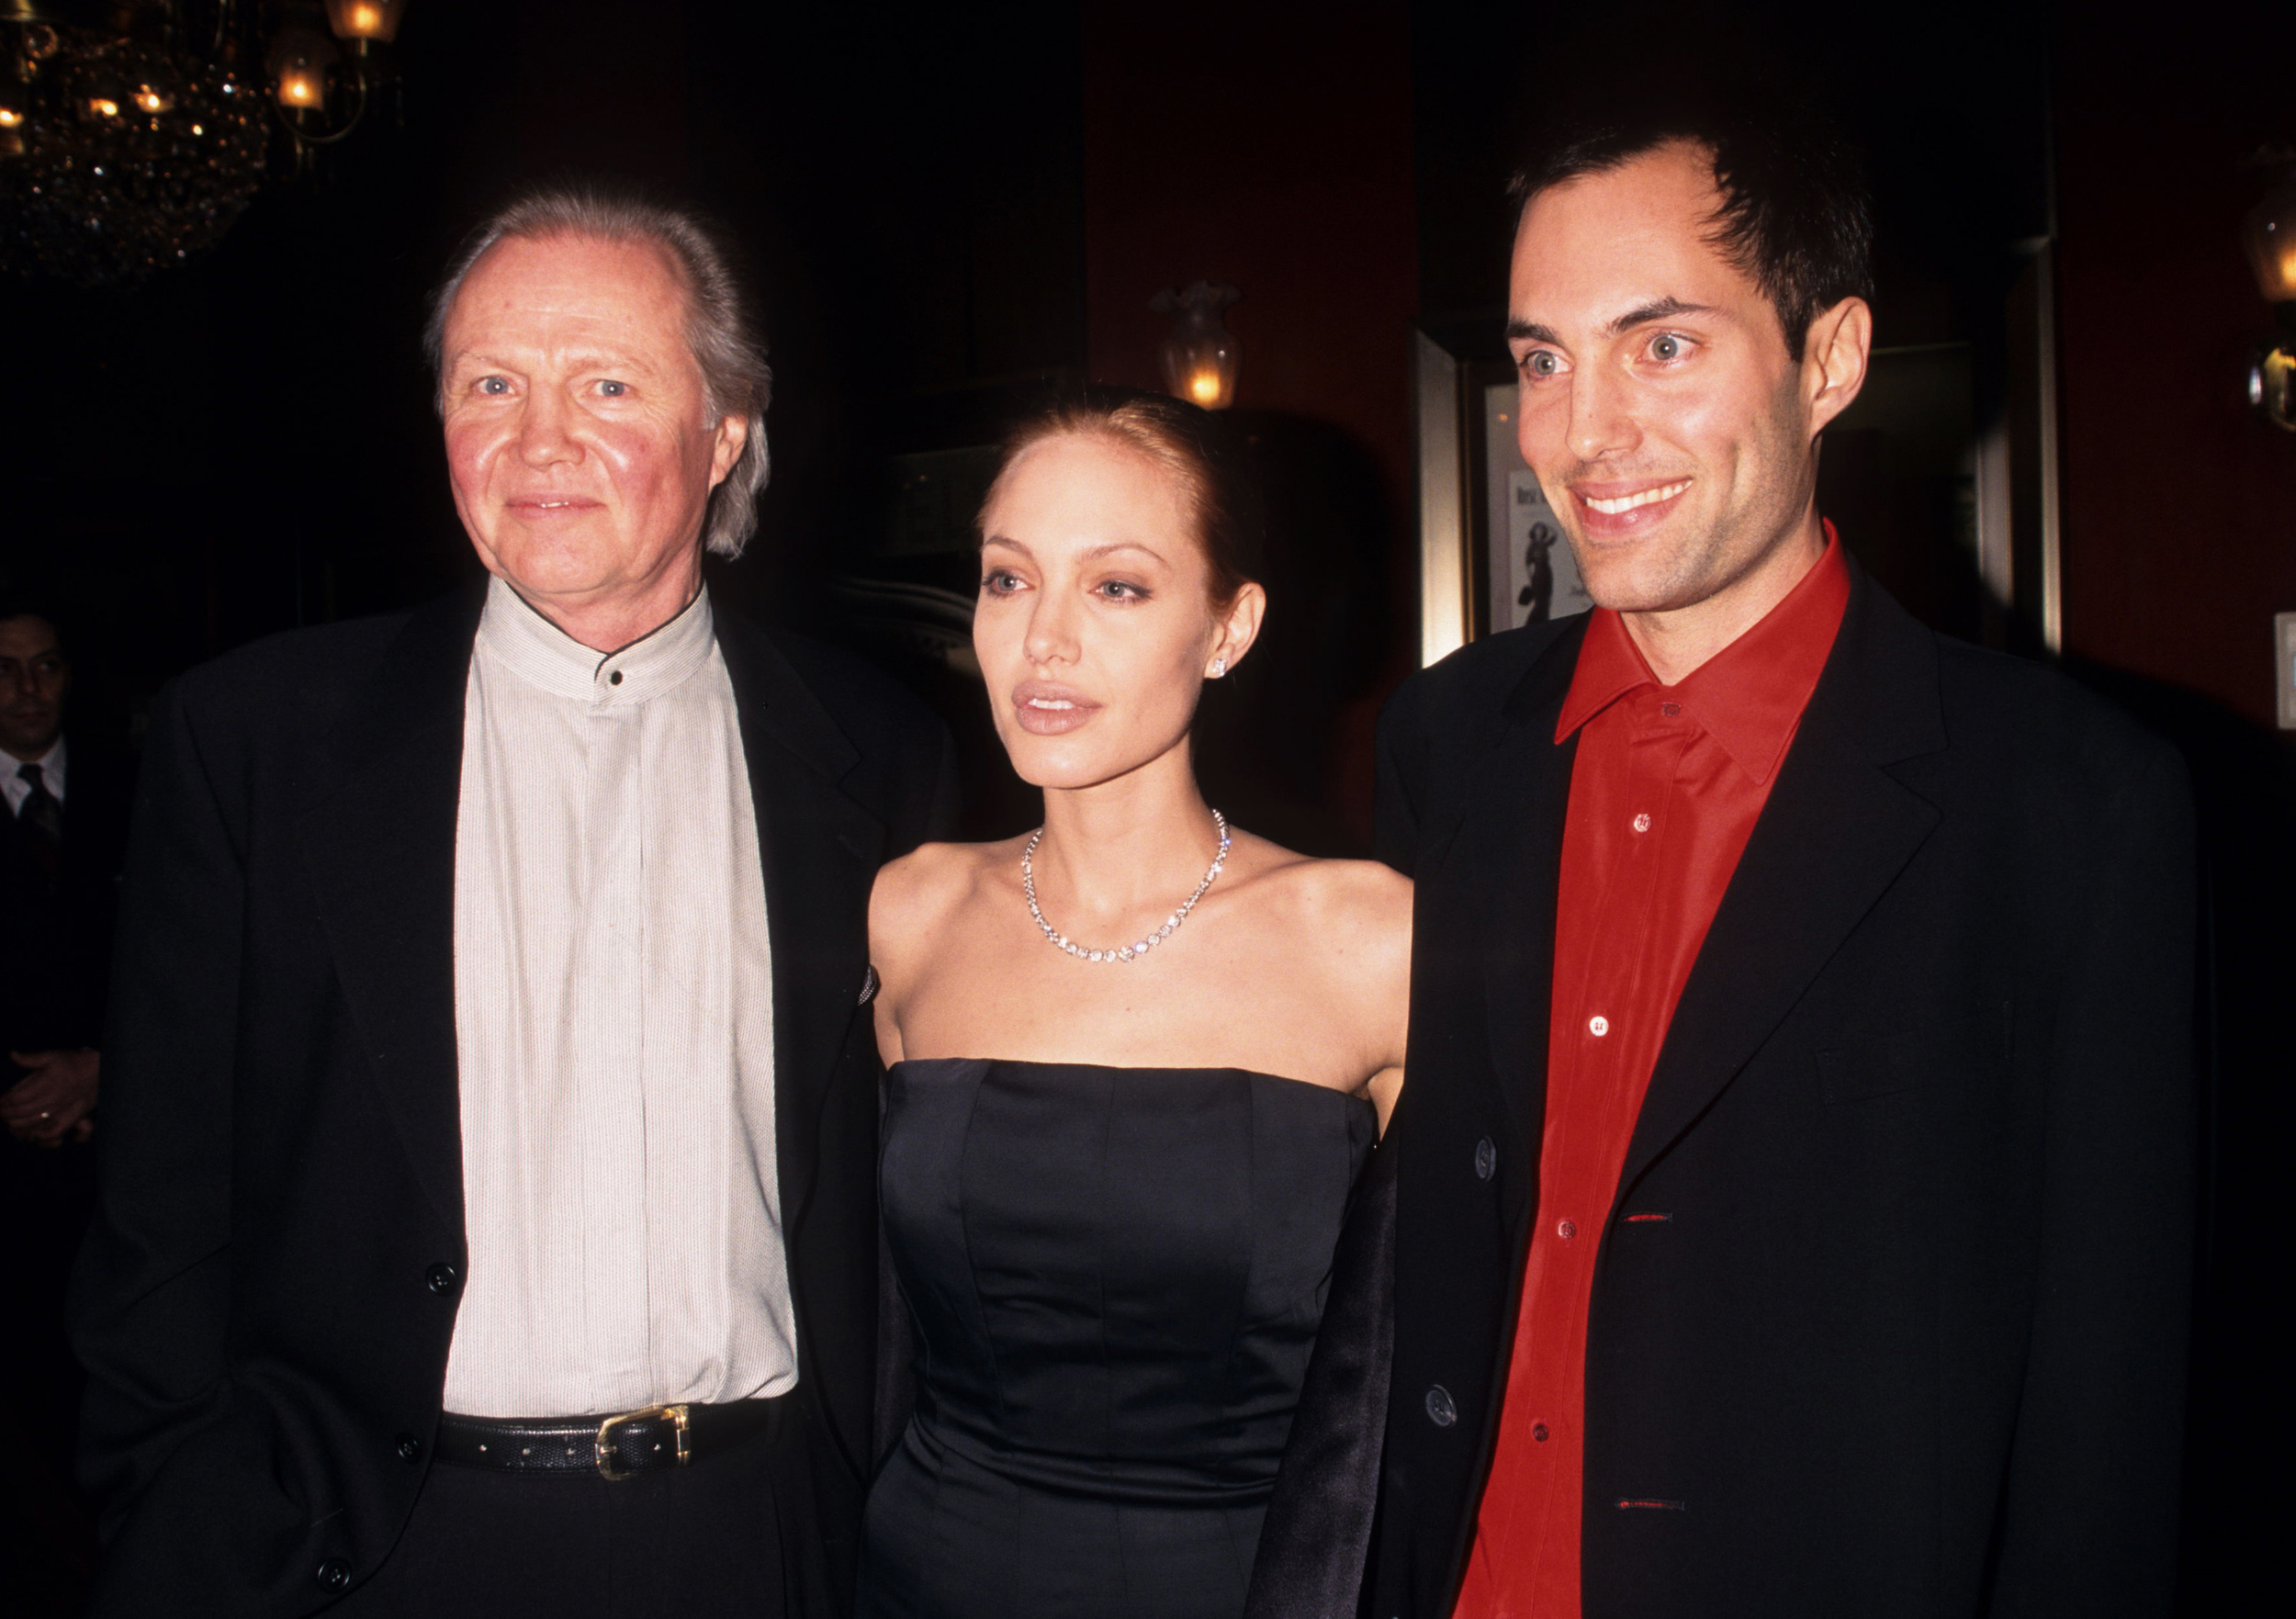 <p>Though acting legend Jon Voight (<em>Midnight Cowboy, Deliverance, Coming Home</em>) and his daughter, Angelina Jolie (<em>Girl, Interrupted, Gia, George Wallace</em>)<em>,</em> haven't had the best relationship over the years, the talent they've displayed on-screen is hard to top when it comes to father-daughter acting duos. Jolie's brother, James Haven, has also enjoyed small roles in film and TV.</p><p><a href='https://www.msn.com/en-us/community/channel/vid-cj9pqbr0vn9in2b6ddcd8sfgpfq6x6utp44fssrv6mc2gtybw0us'>Follow us on MSN to see more of our exclusive entertainment content.</a></p>